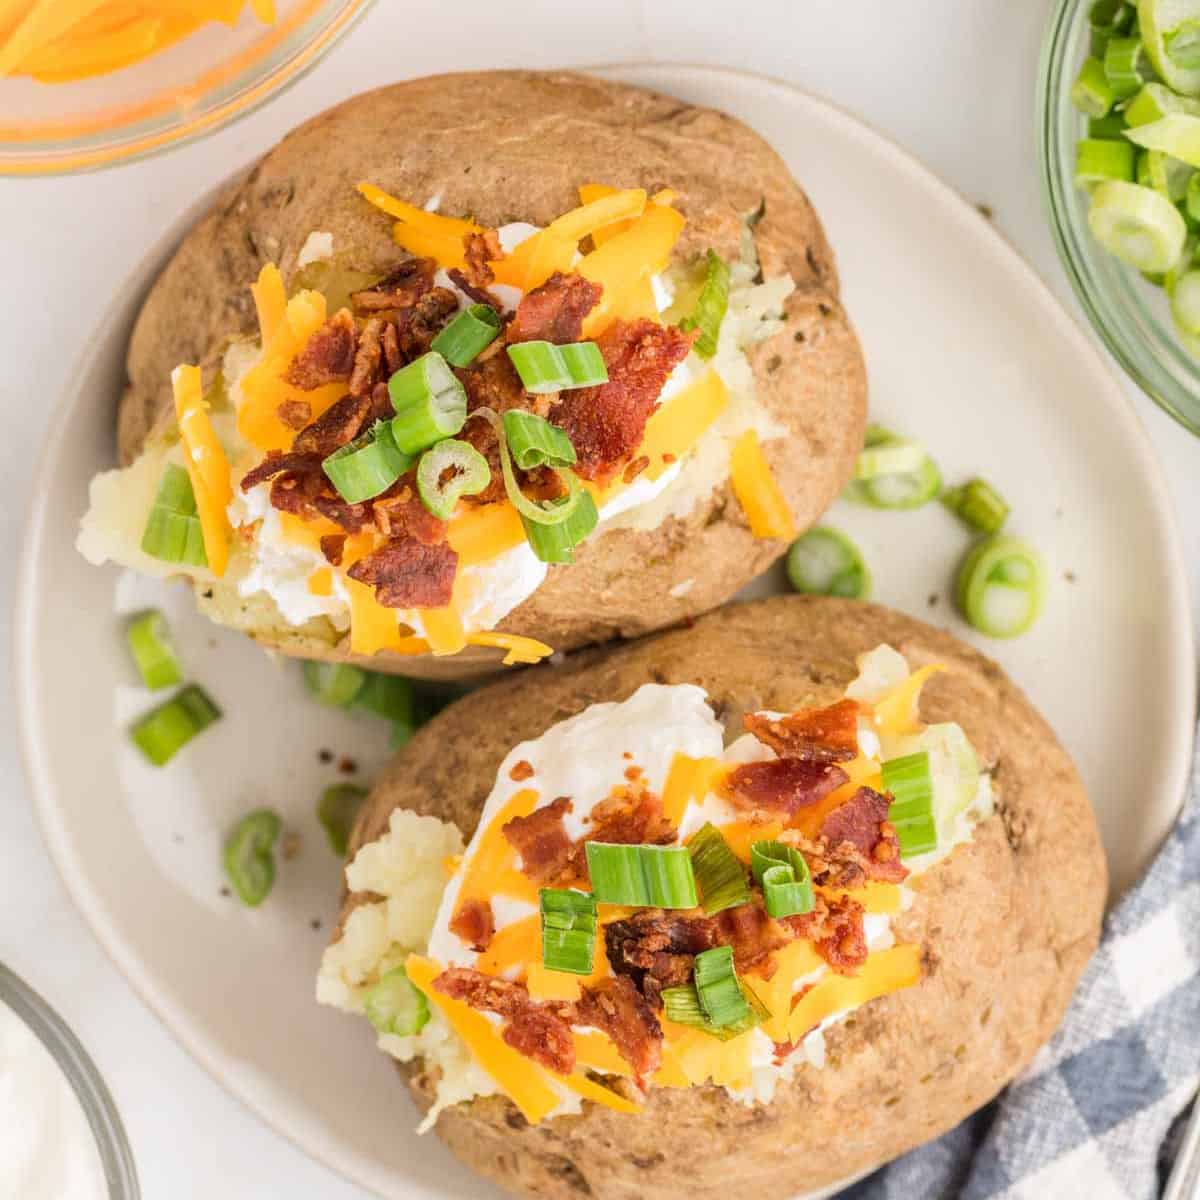 Baked Potato Bag for Microwave, Step-by-Step Instructions